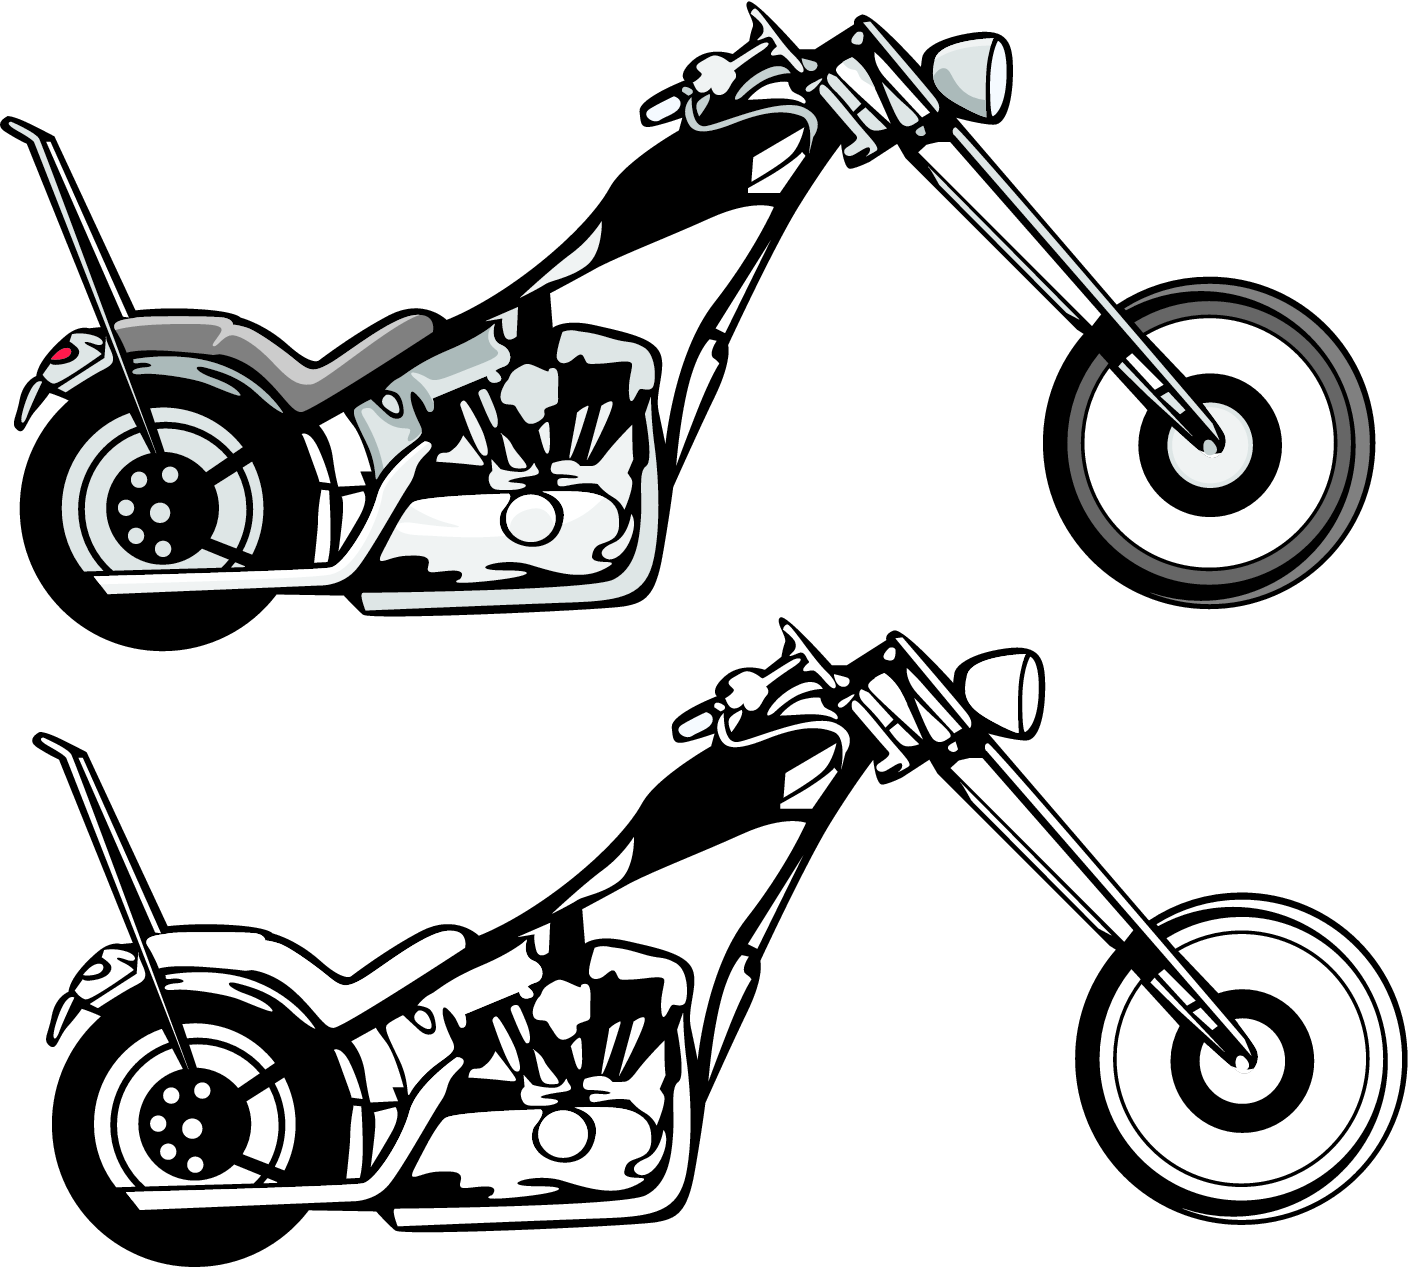 Motorcycle Clipart Black And White   Clipart Panda   Free Clipart